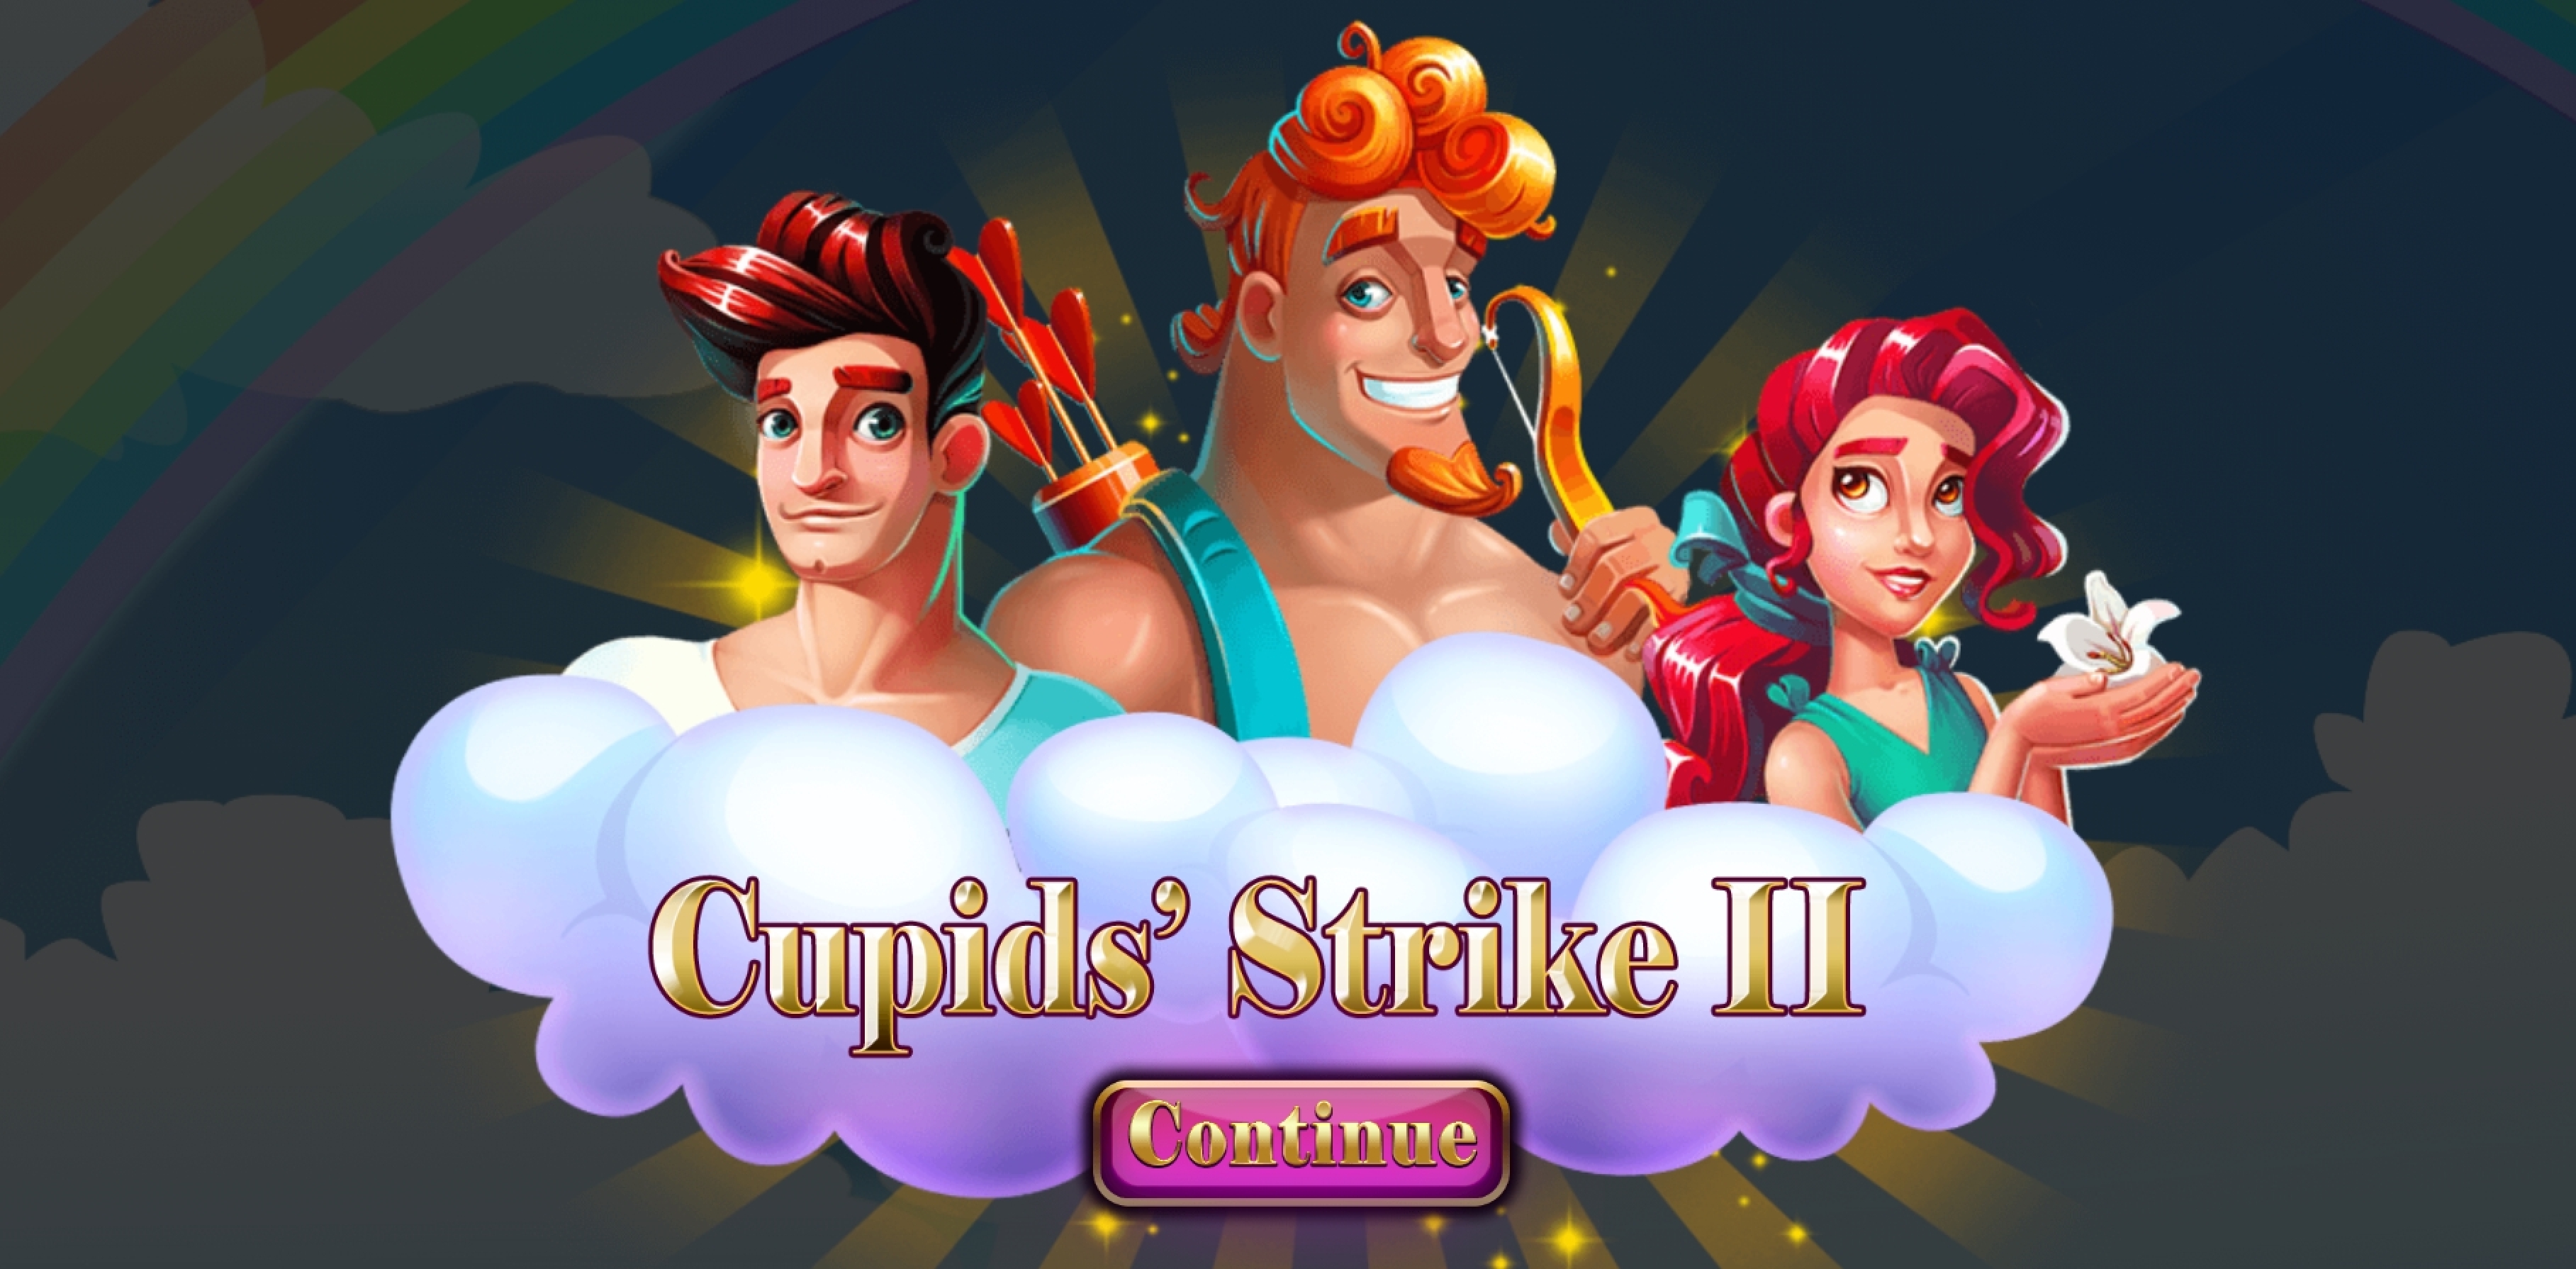 Play Cupids Strike 2 Free Casino Slot Game by Spinomenal